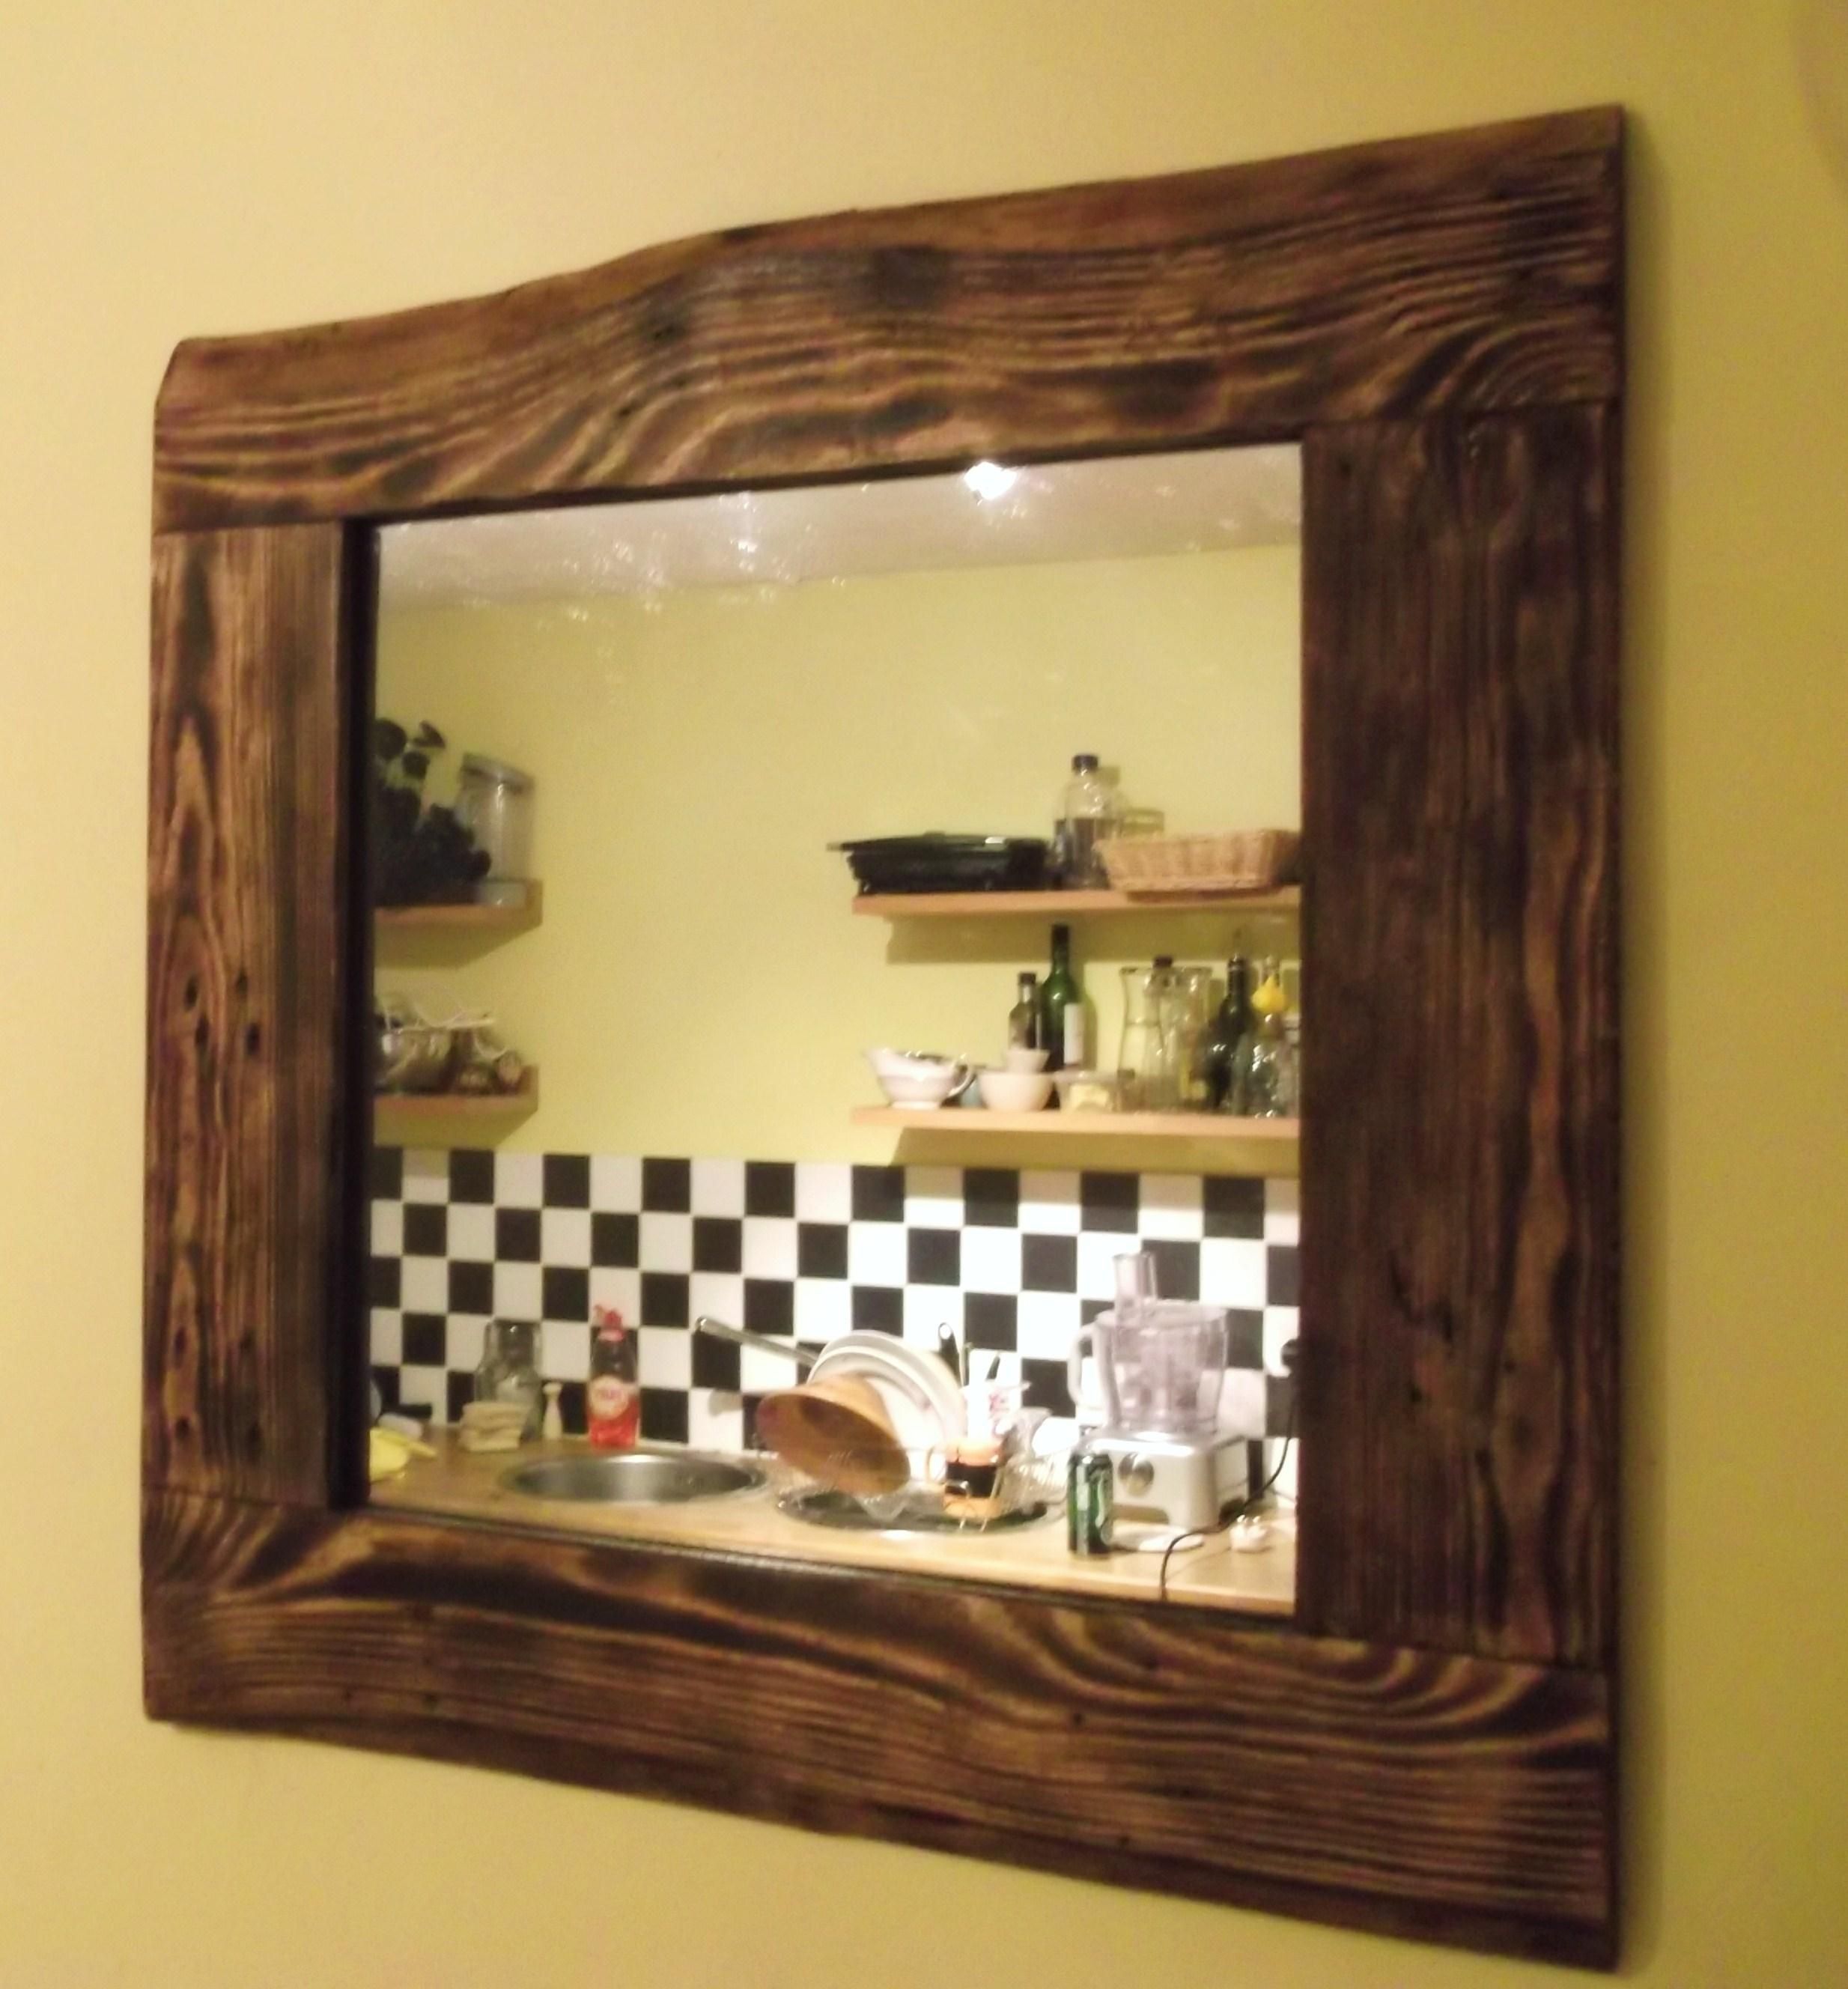 Reclaimed Wood Mirrors | Dave's Beach Hut With Regard To Decorative Wooden Mirrors (View 17 of 20)